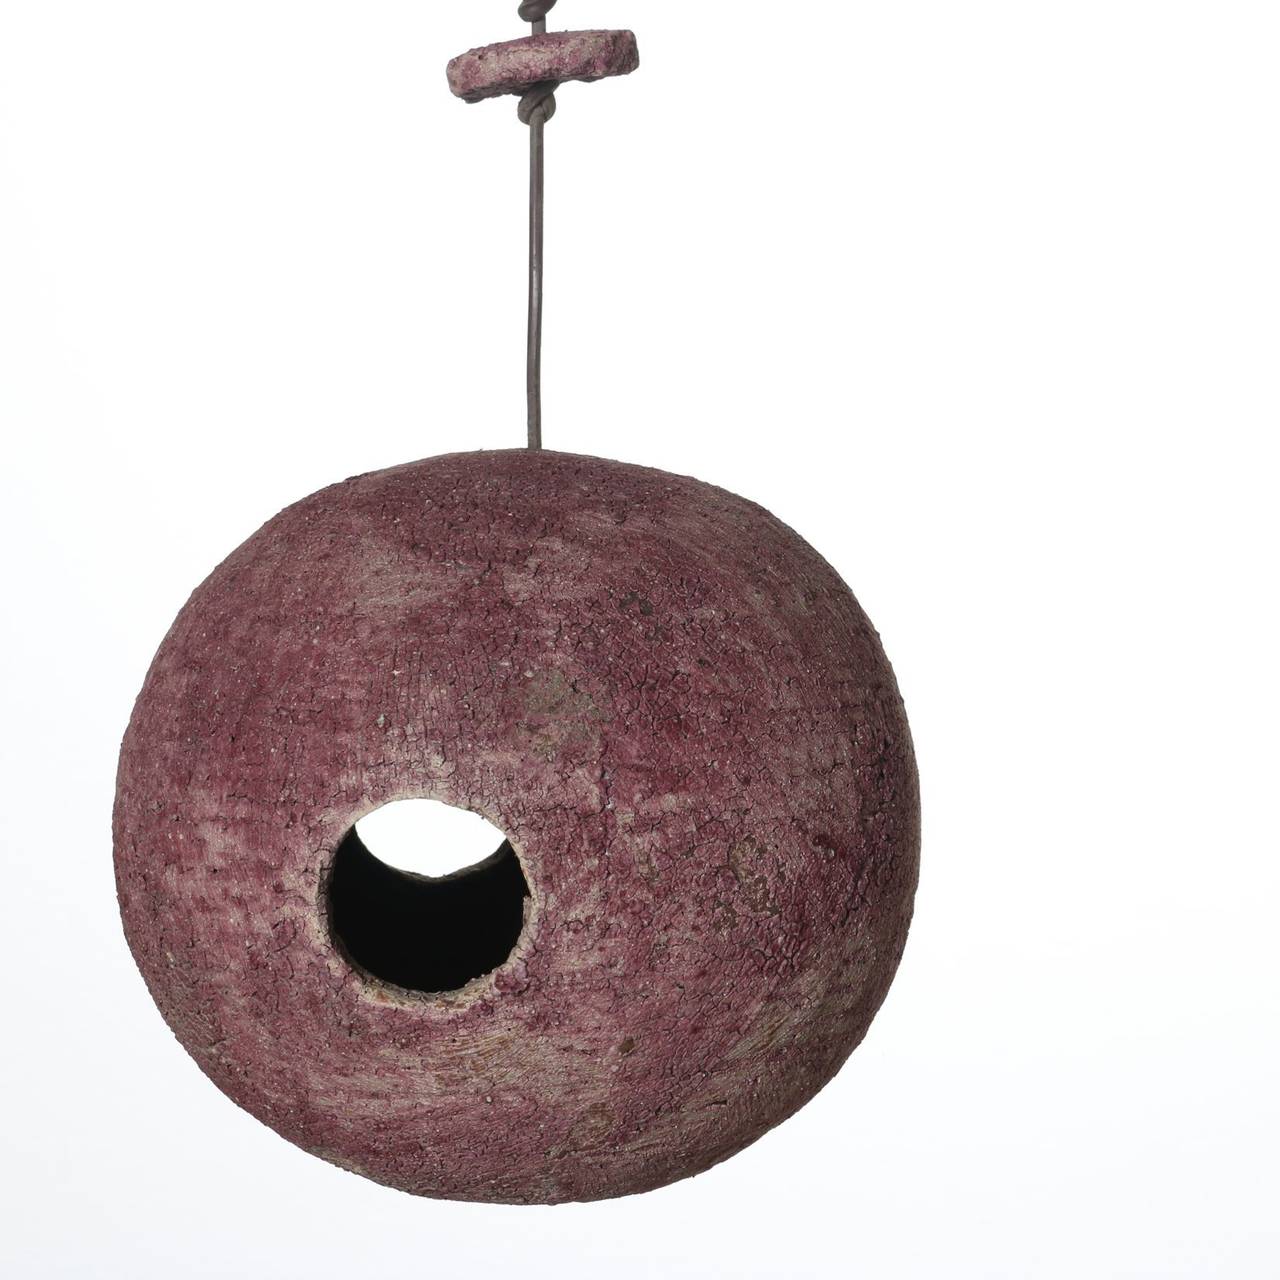 Stan Bitters Bird House, made circa 1970 in an unusual shade of violet - red. This birdhouse has spent its life hanging in a tree. The violet-red matte glaze is now aged and weathered with a solid cherished patina that only nature provides. It makes